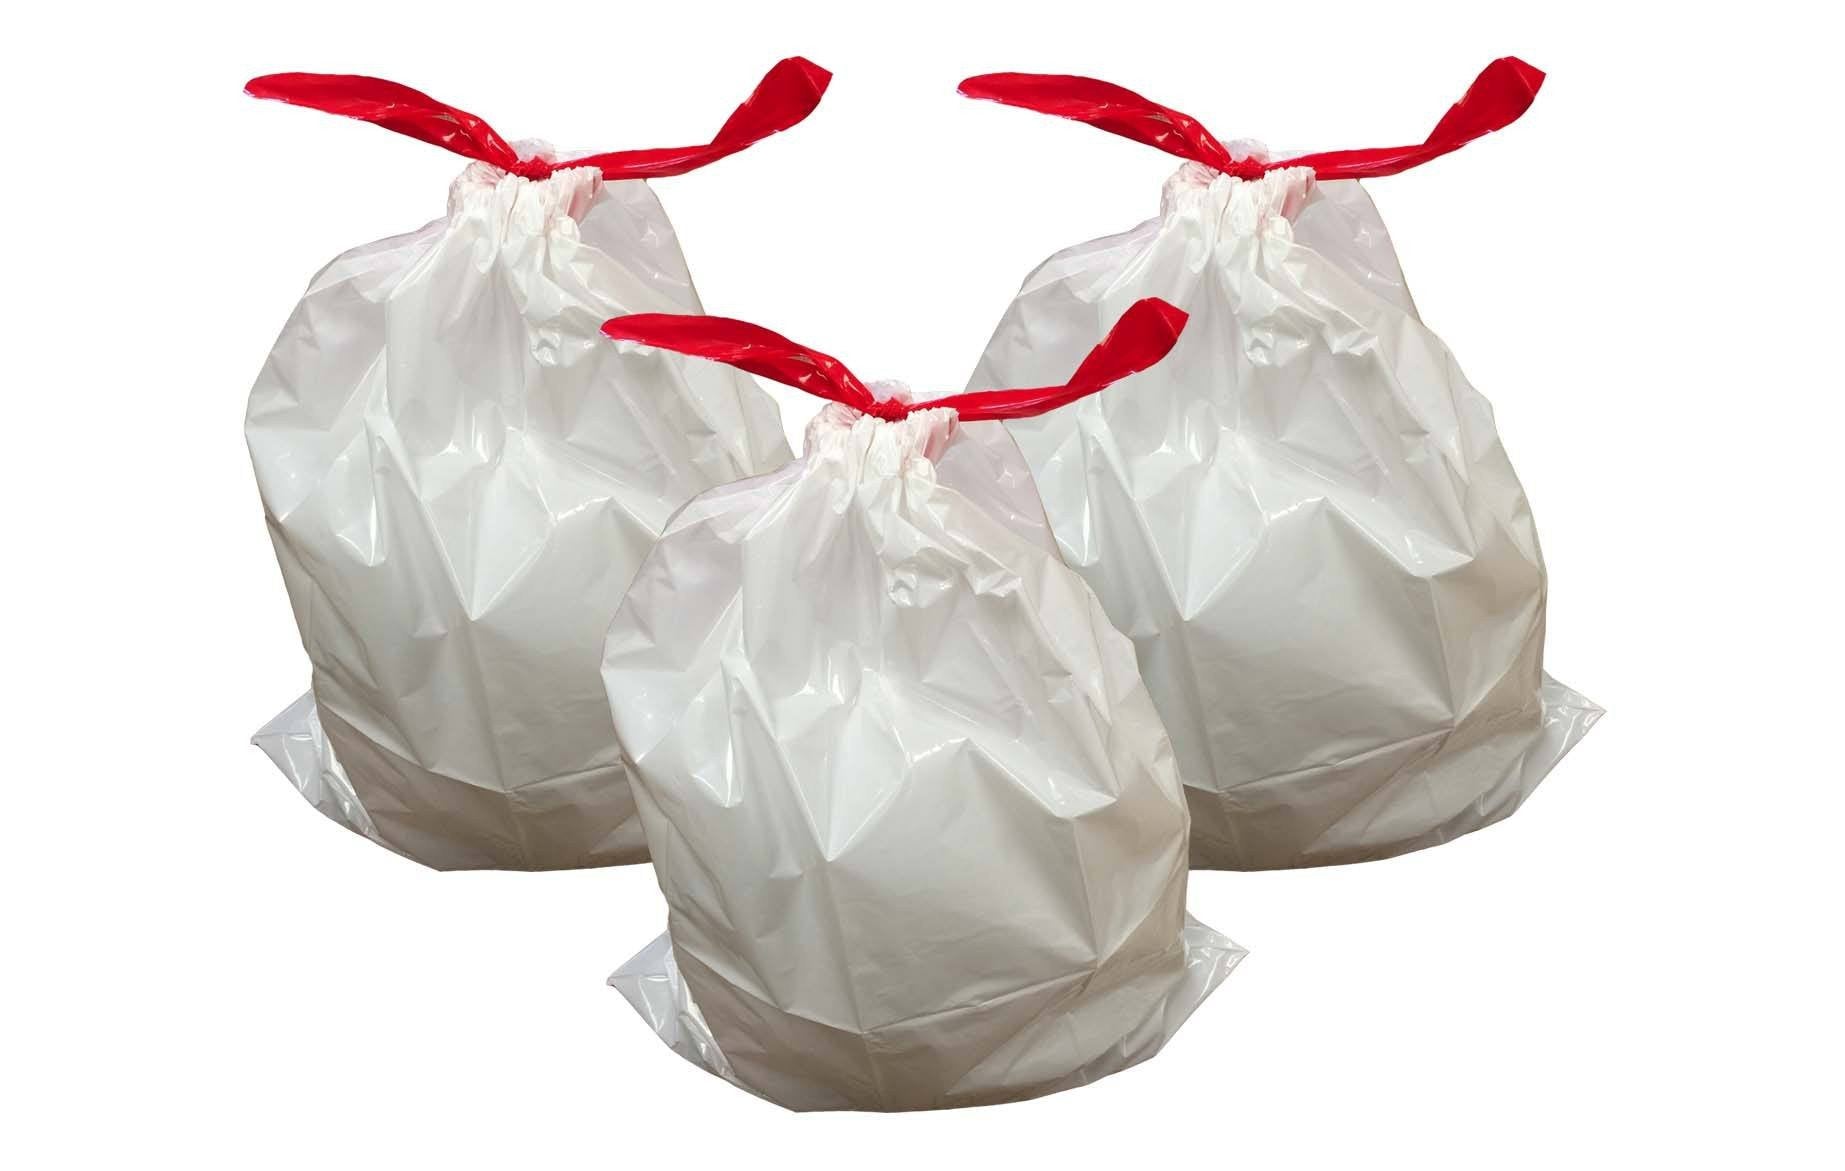 Sanita Club Garbage Bags Oxo-Biodegradable Medium 30 Gallons Size 72 x  85cms 20pcs Buy Online at Best Price in Gulf Countries - Dukakeen.com